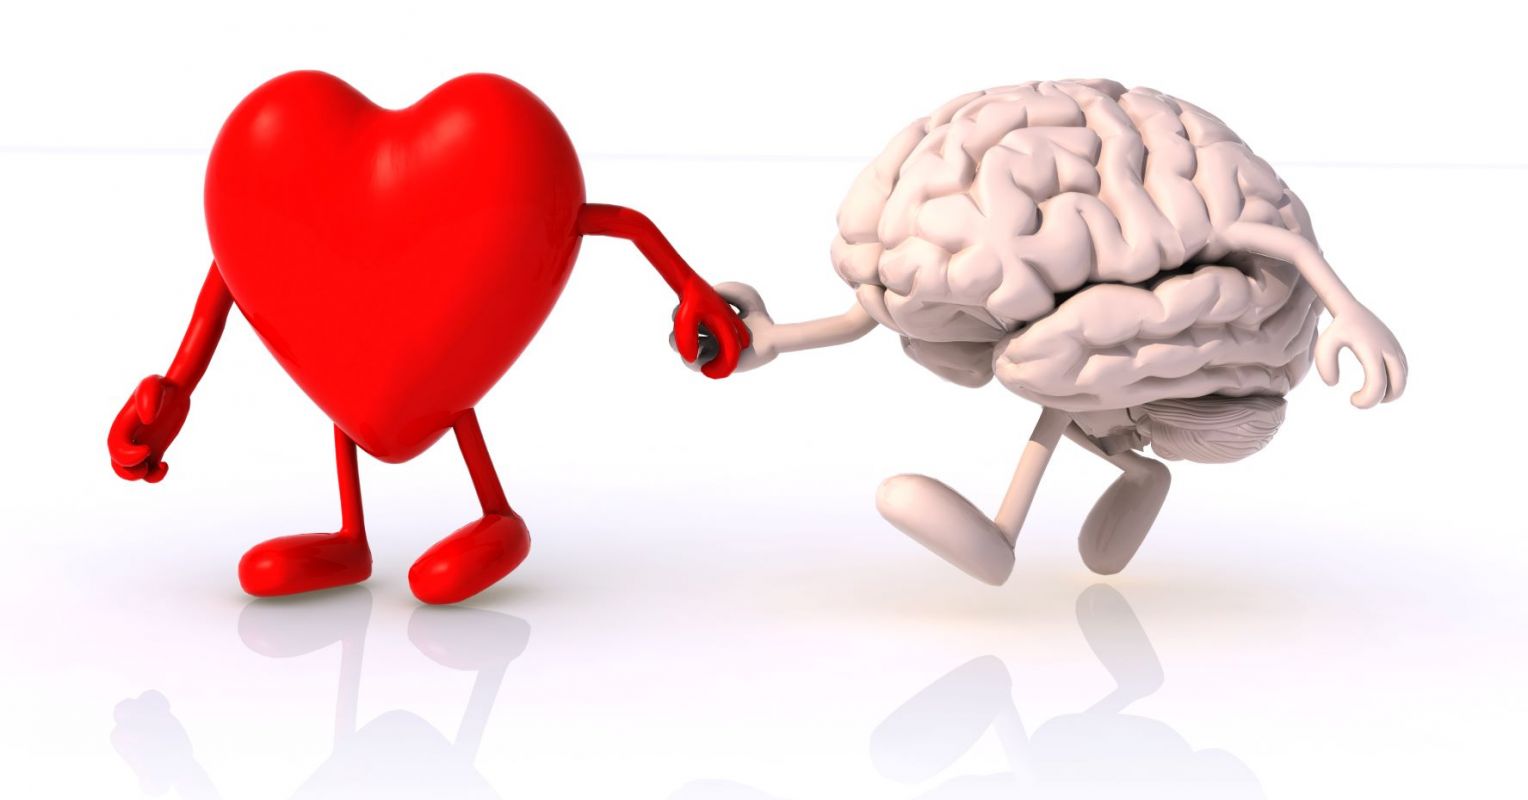 Why Body, Heart, and Mind Are So Important for Well-Being | Psychology Today